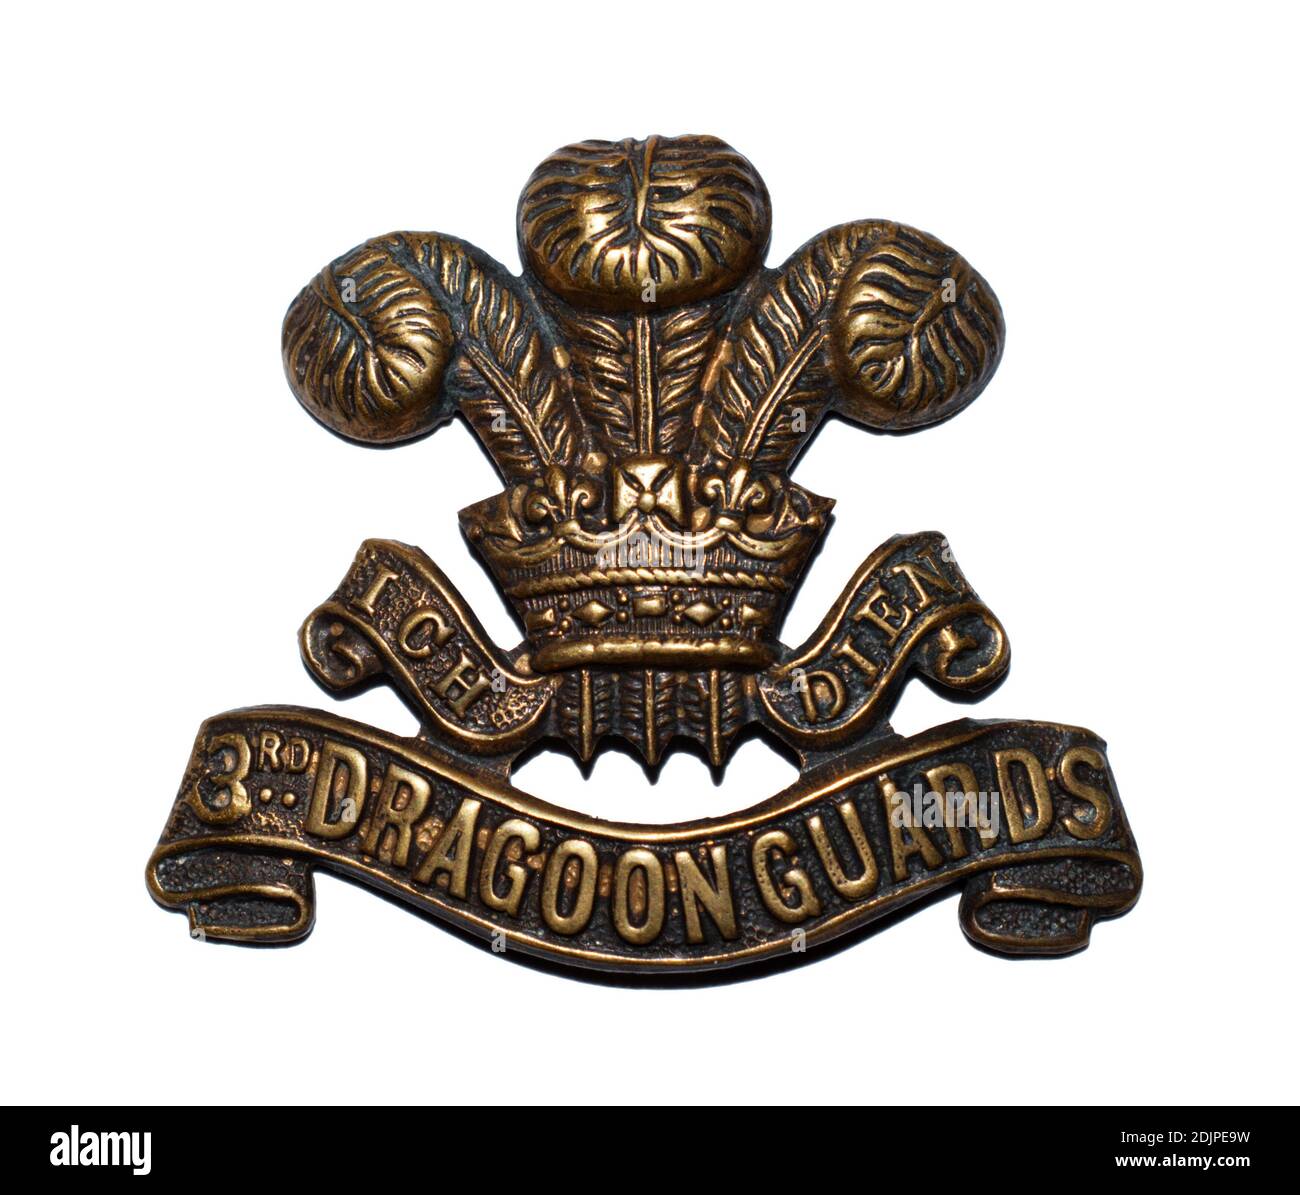 A cap badge of the 3rd (Prince of Wales's) Dragoon Guards c. 1900-1922. Stock Photo